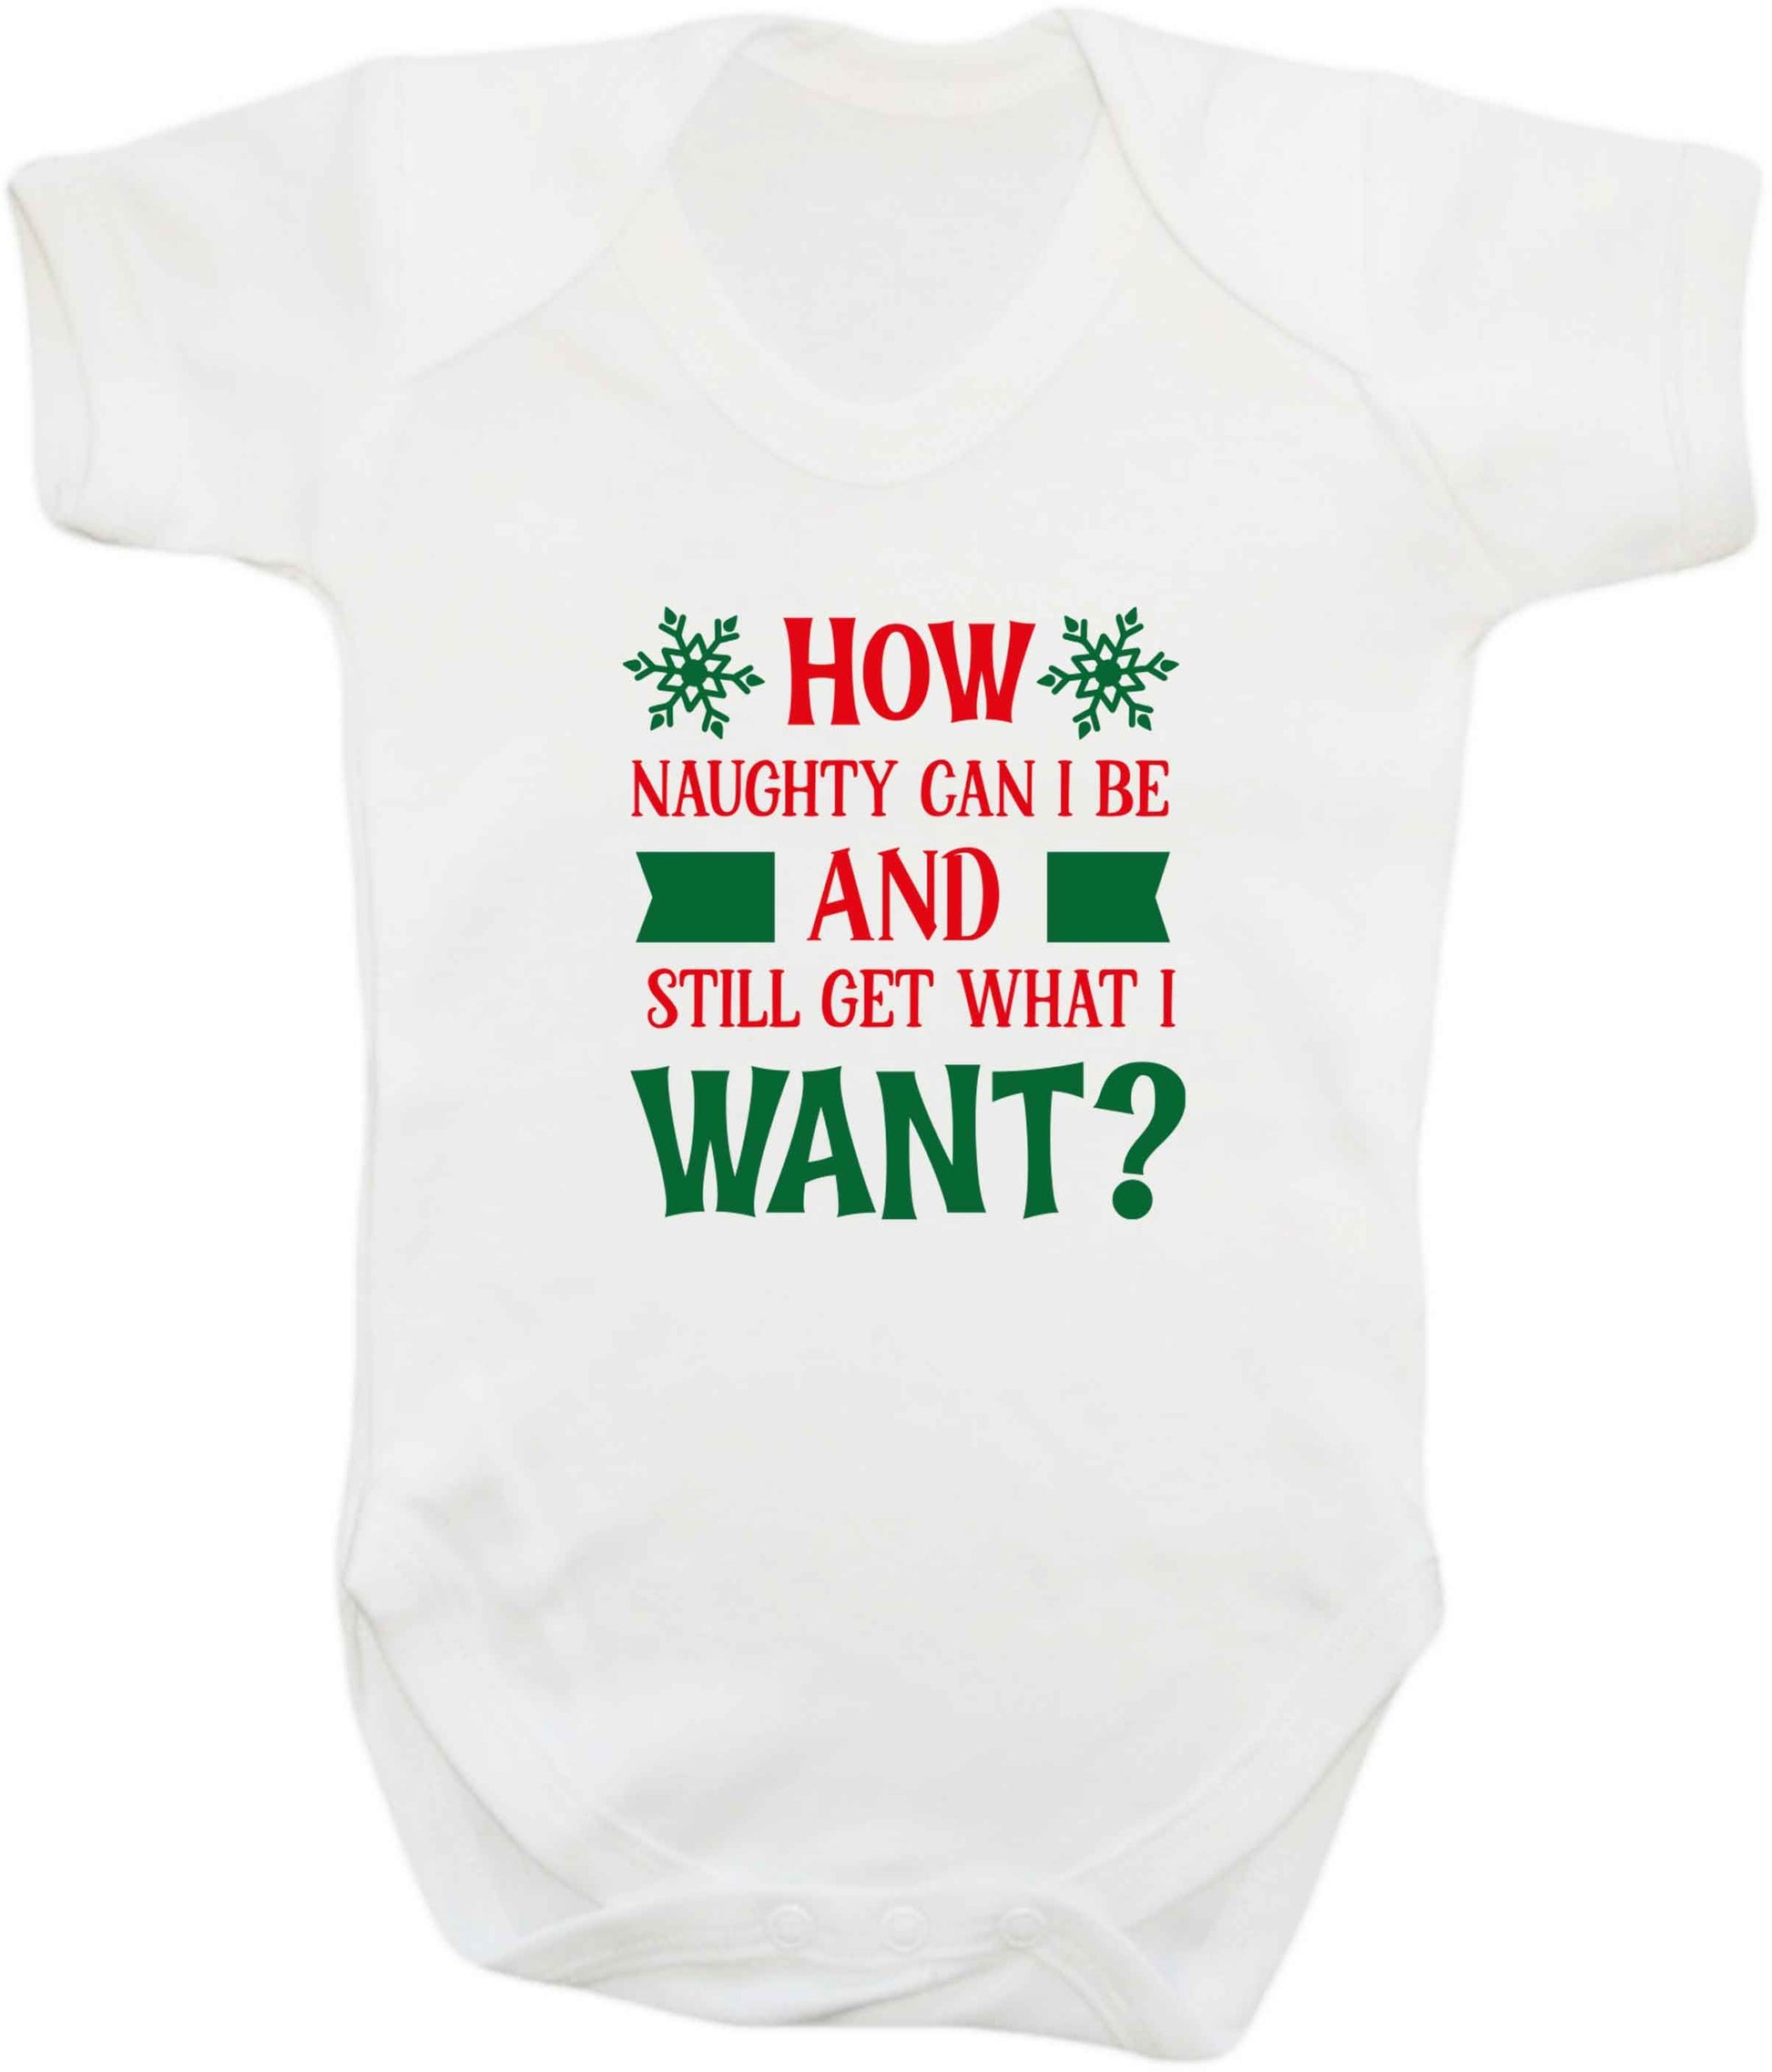 How naughty can I be and still get what I want? baby vest white 18-24 months